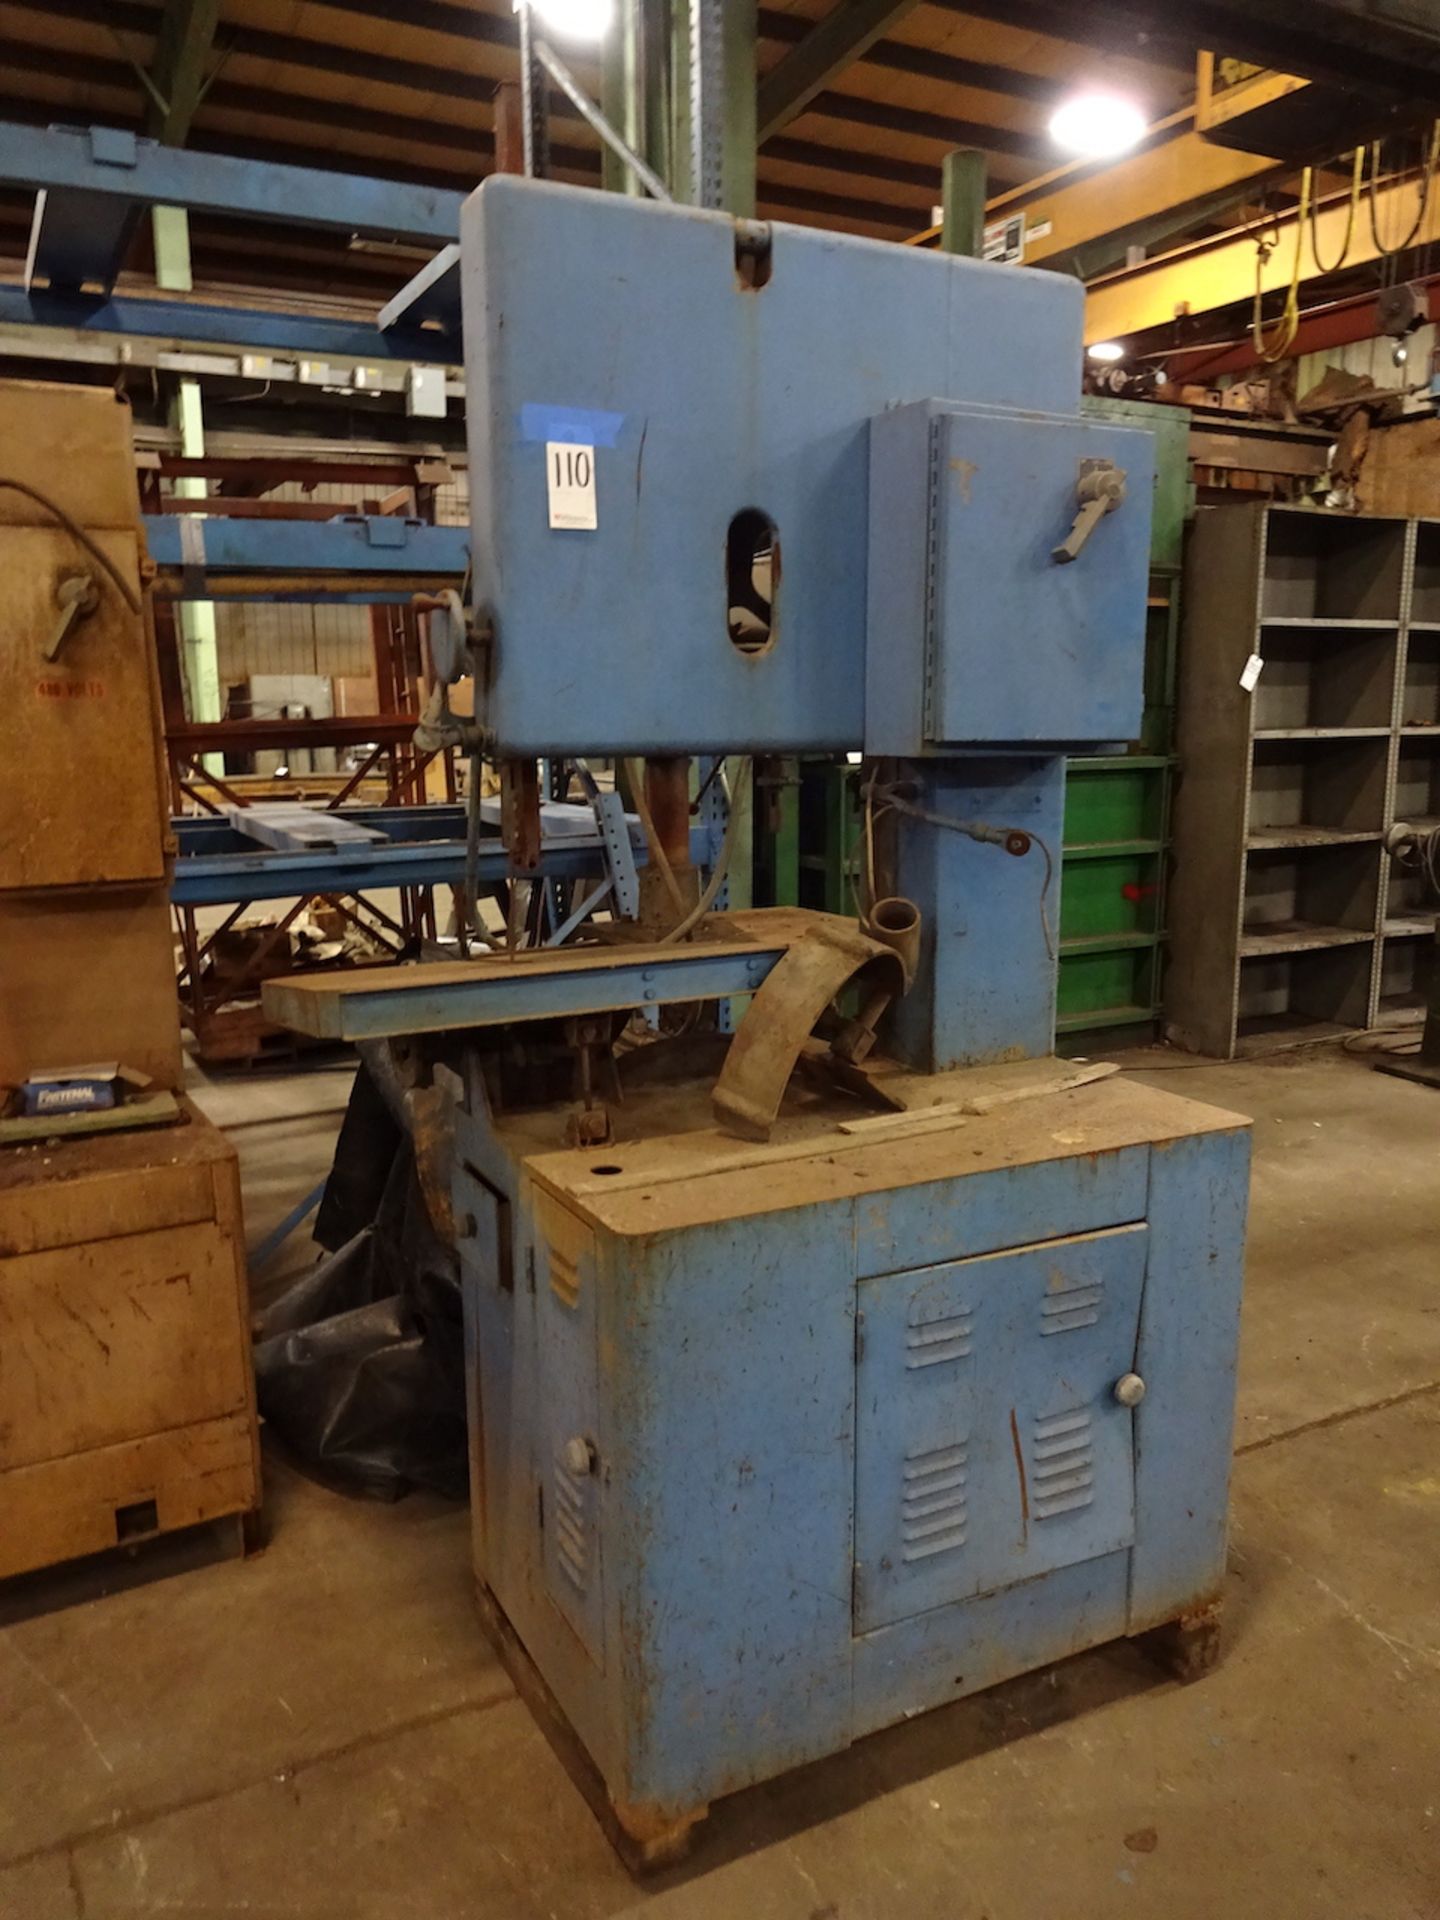 Grob 24 in. Model HS24 Vertical Band Saw, S/N 341